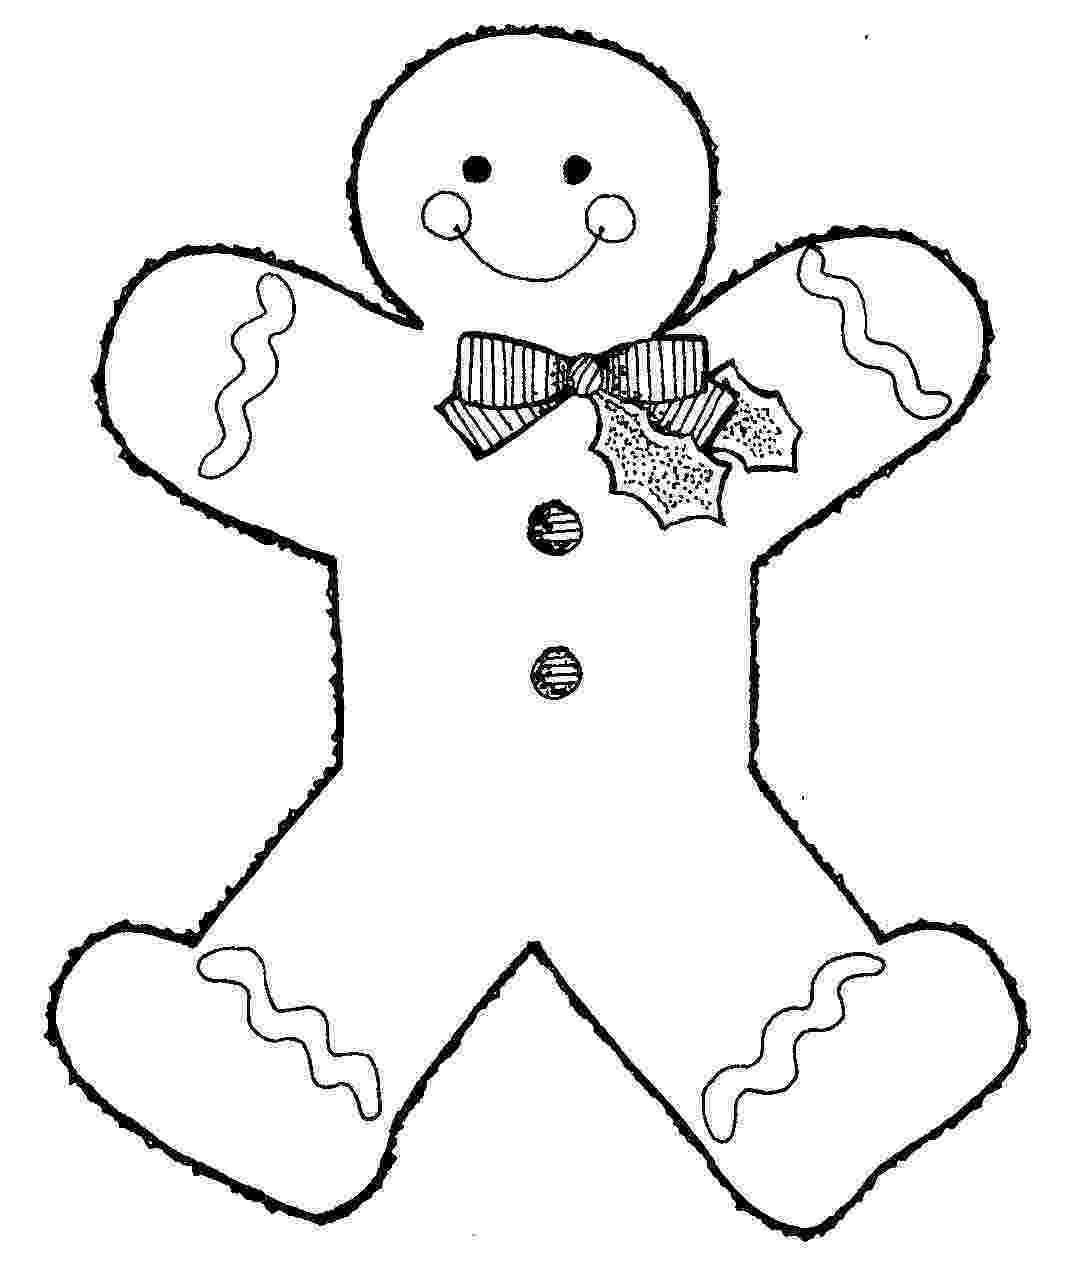 picture of gingerbread man to color free printable gingerbread man coloring pages for kids man color picture to gingerbread of 